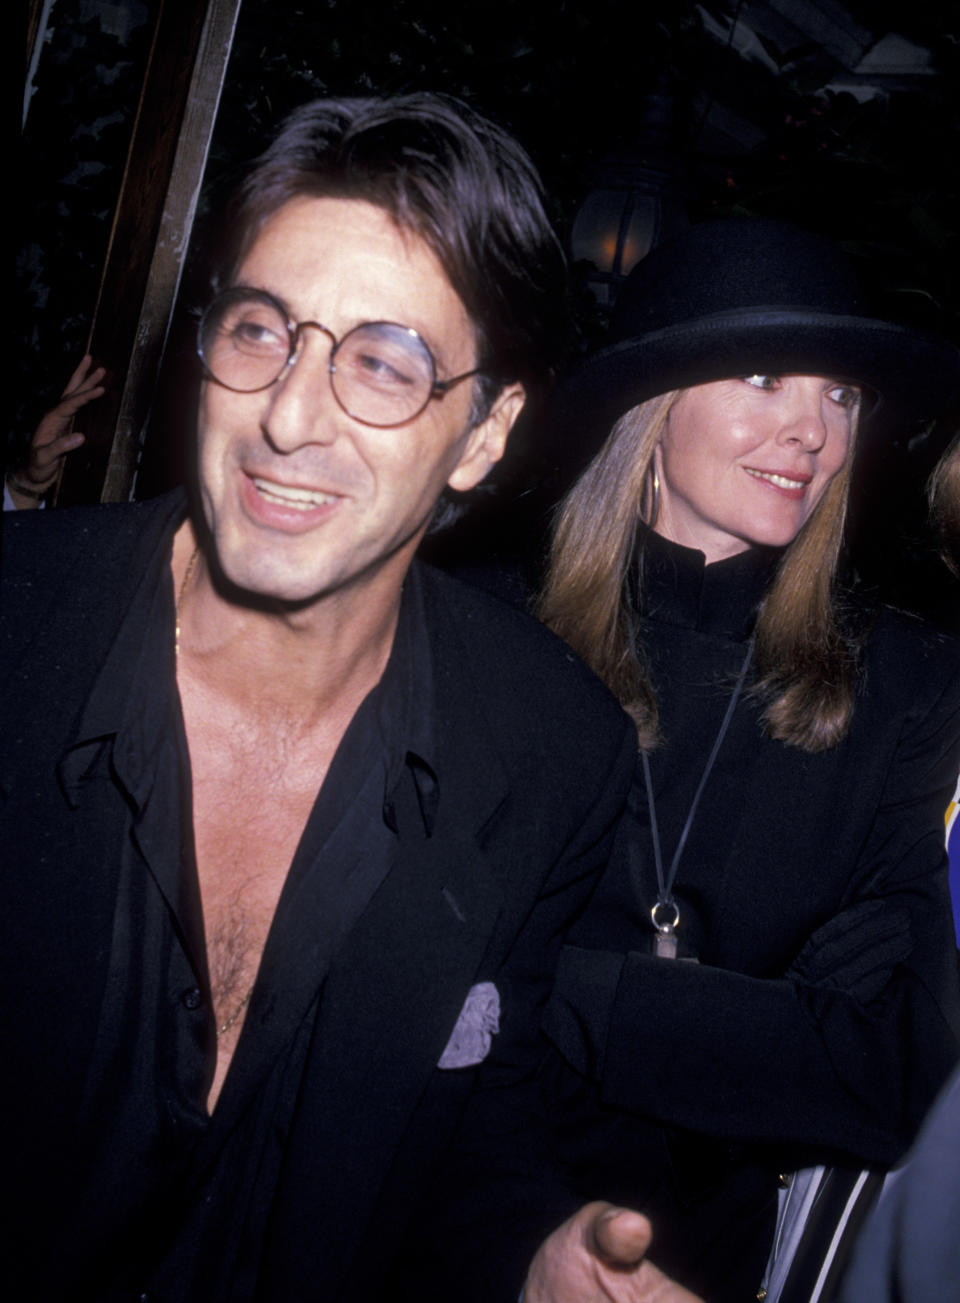 Al Pacino and Diane Keaton arrive at the "Sea of Love" premiere party on September 12, 1989